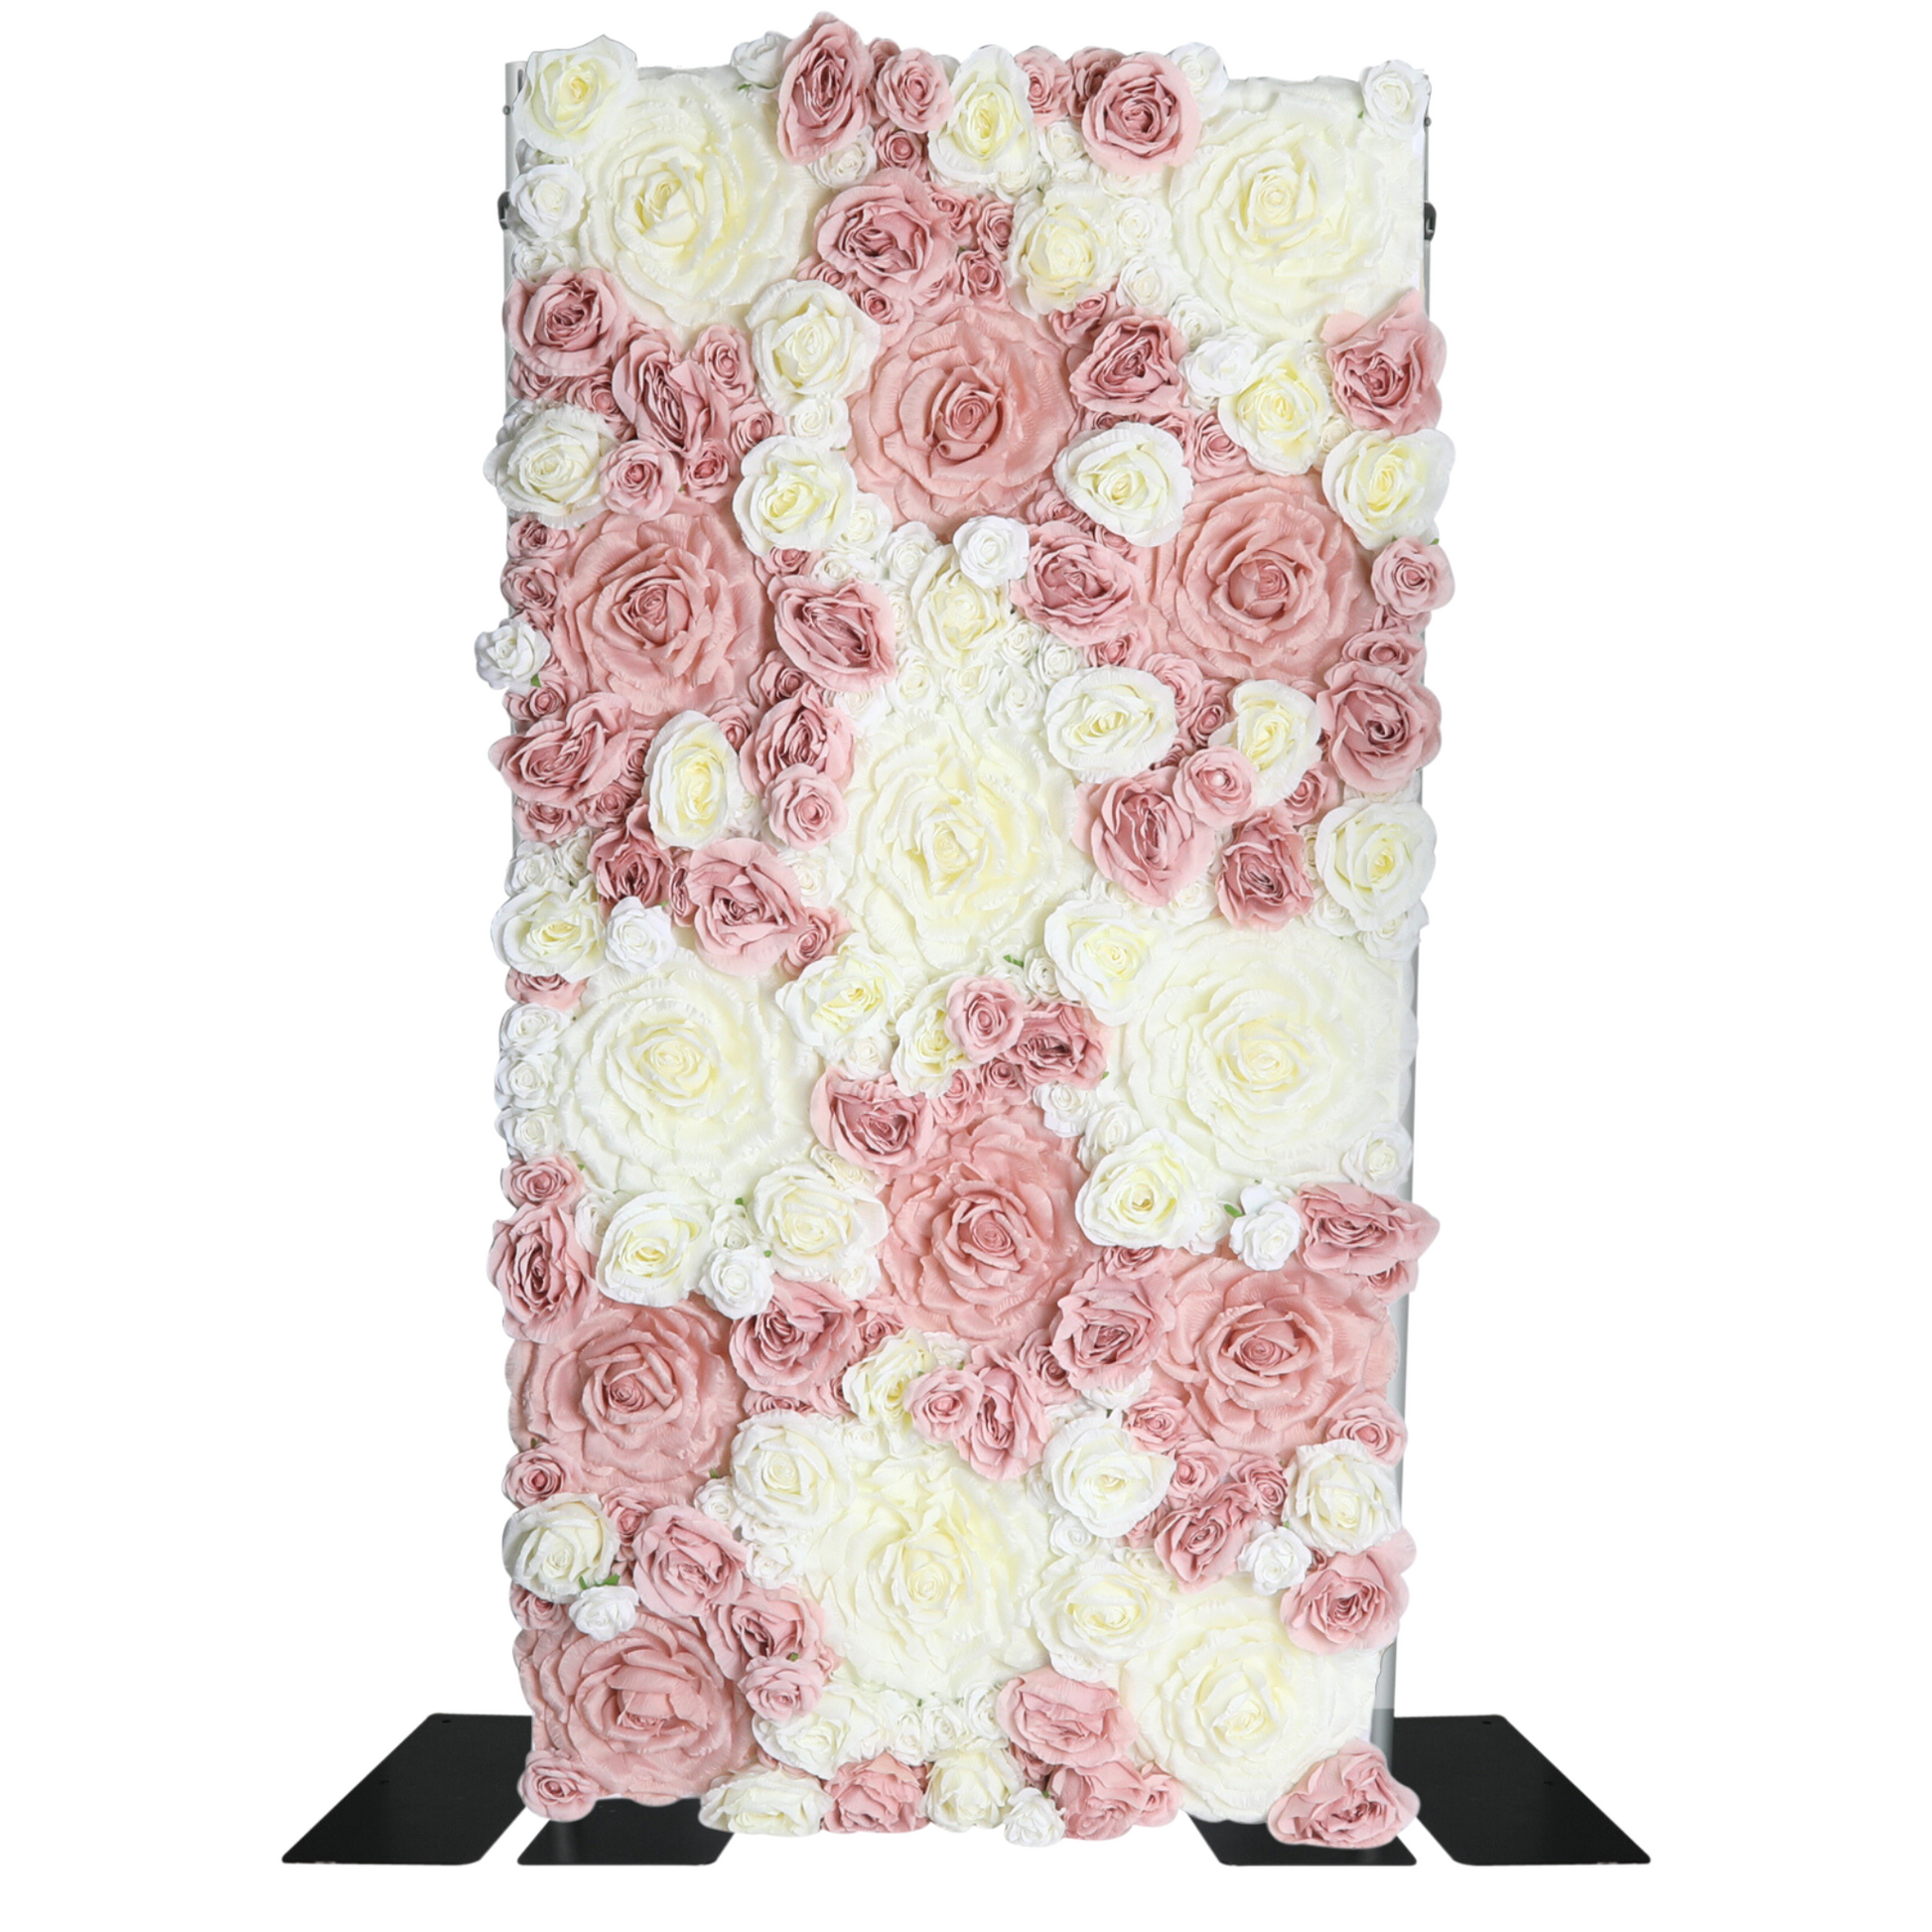 Luxe Roll Up Flower Wall Backdrop 8ft x 4ft - Pink/Ivory